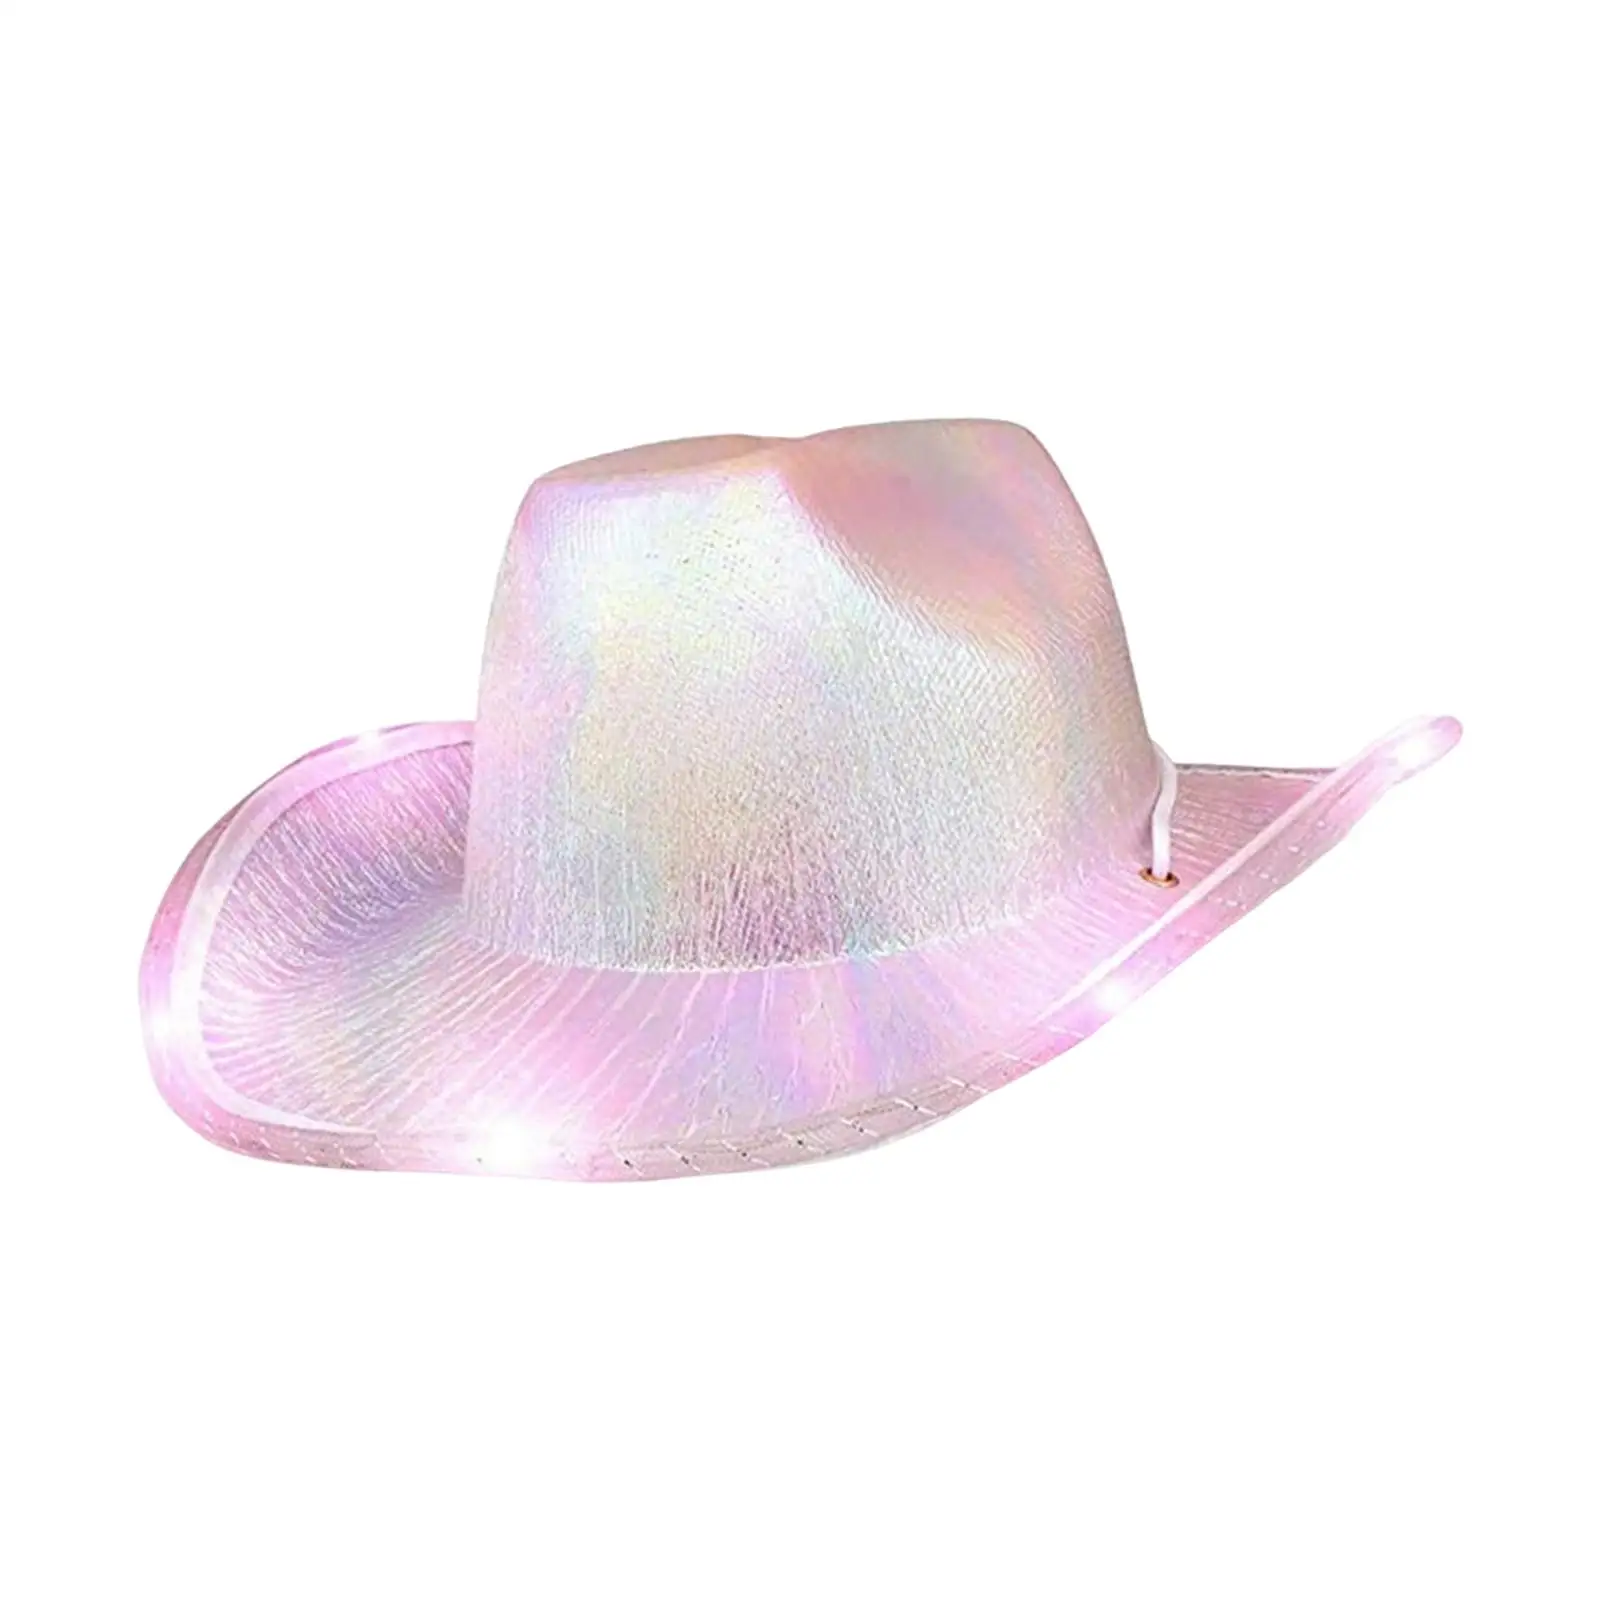 Western Cowgirl Hat Fashion Lightweight Novelty  Hat for Halloween Dress up Costume Accessories Party Indoor Outdoor